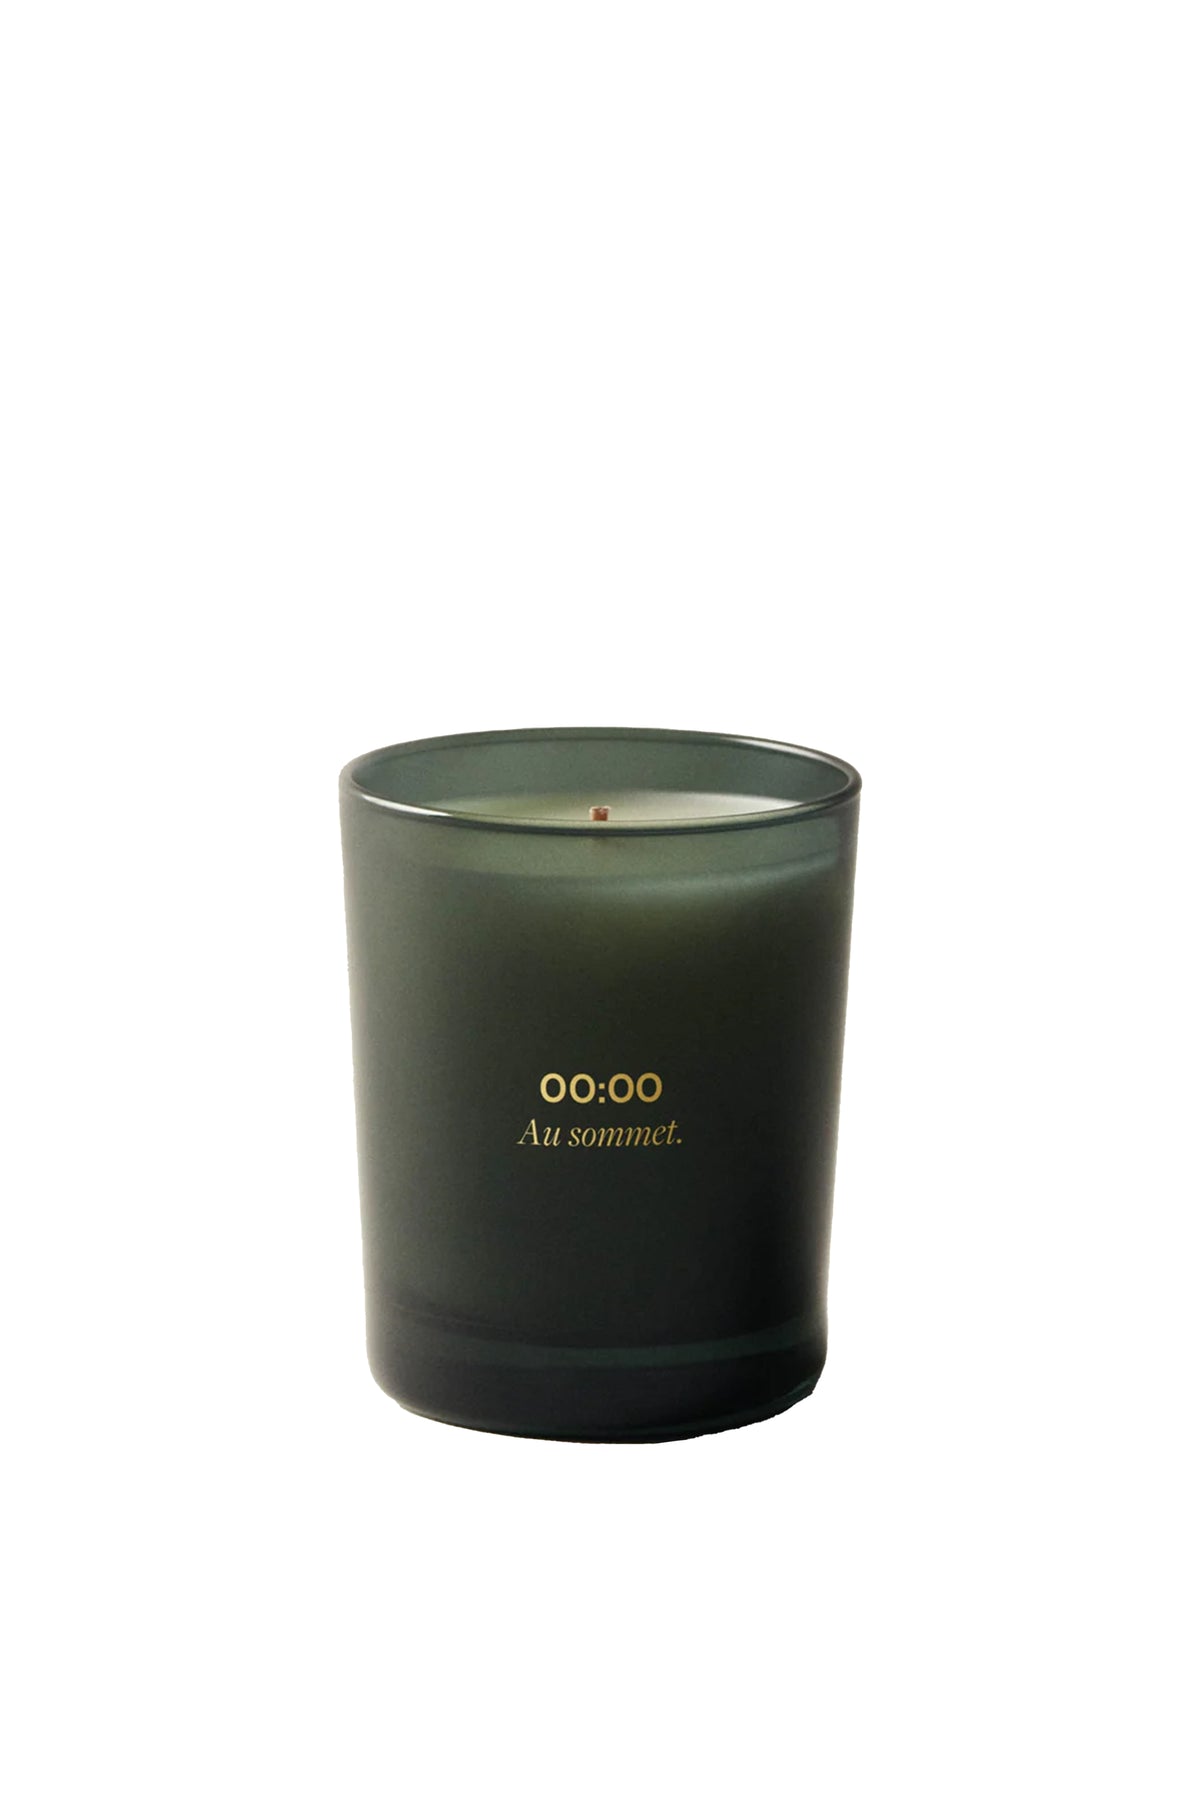 SCENTED CANDLE 00:00 AU SOMMET. / MULTI